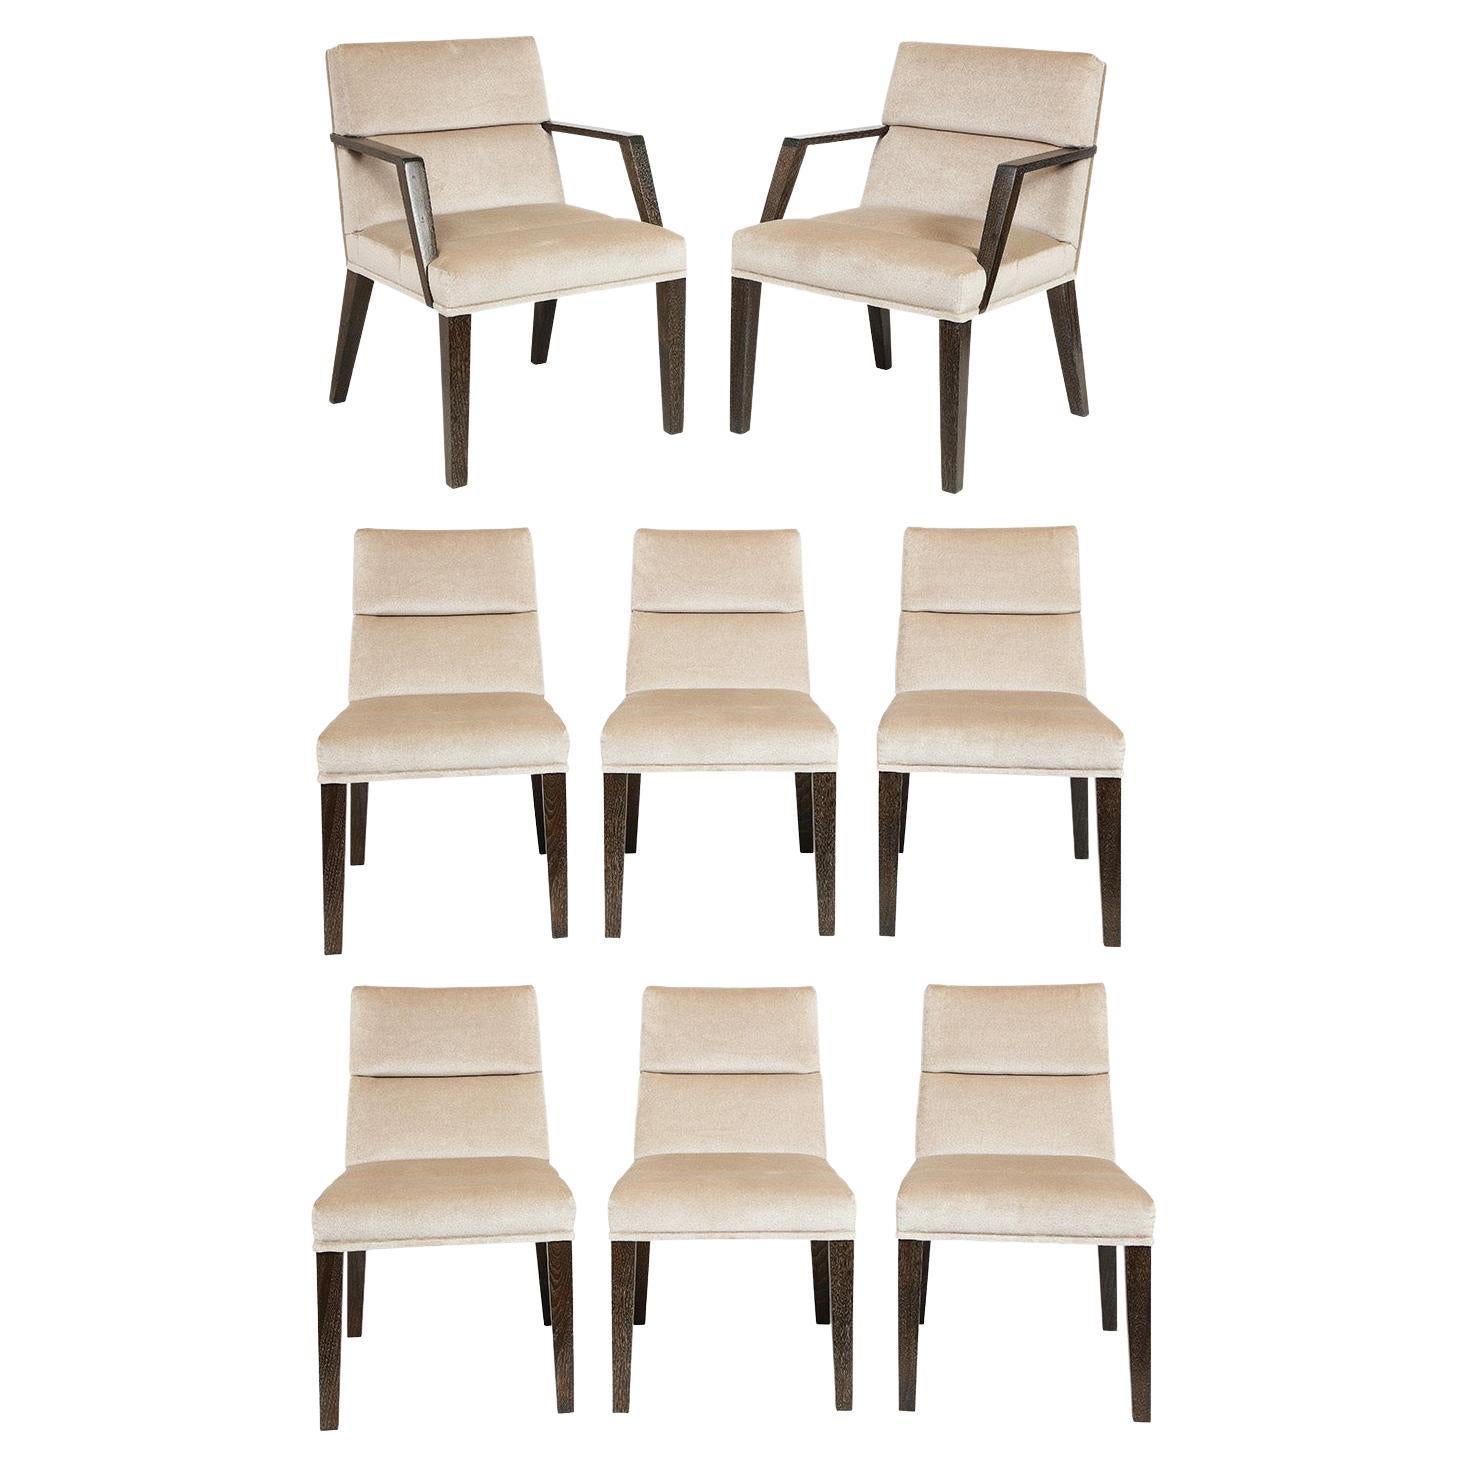 The Bright Group Set of 8 Dining Chairs with Silk Mohair Upholstery 2000s